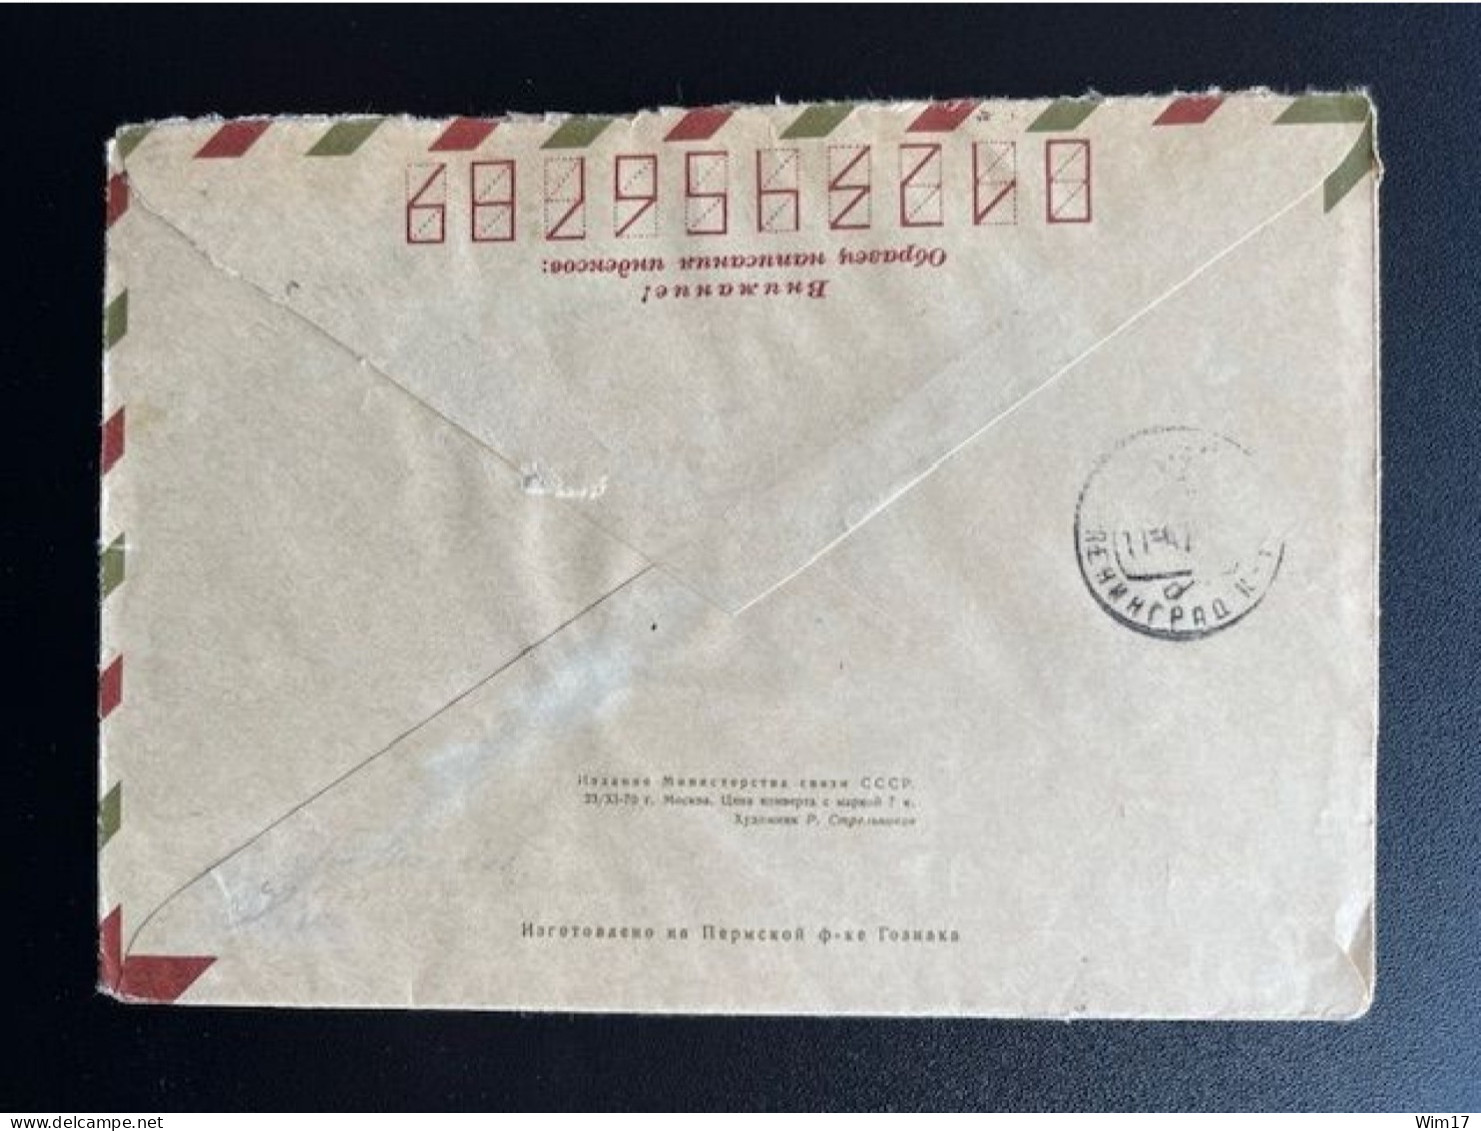 RUSSIA USSR 1971 REGISTERED LETTER MOSCOW 08-04-1971 SOVJET UNIE CCCP SOVIET UNION SPACE GAGARIN - Covers & Documents